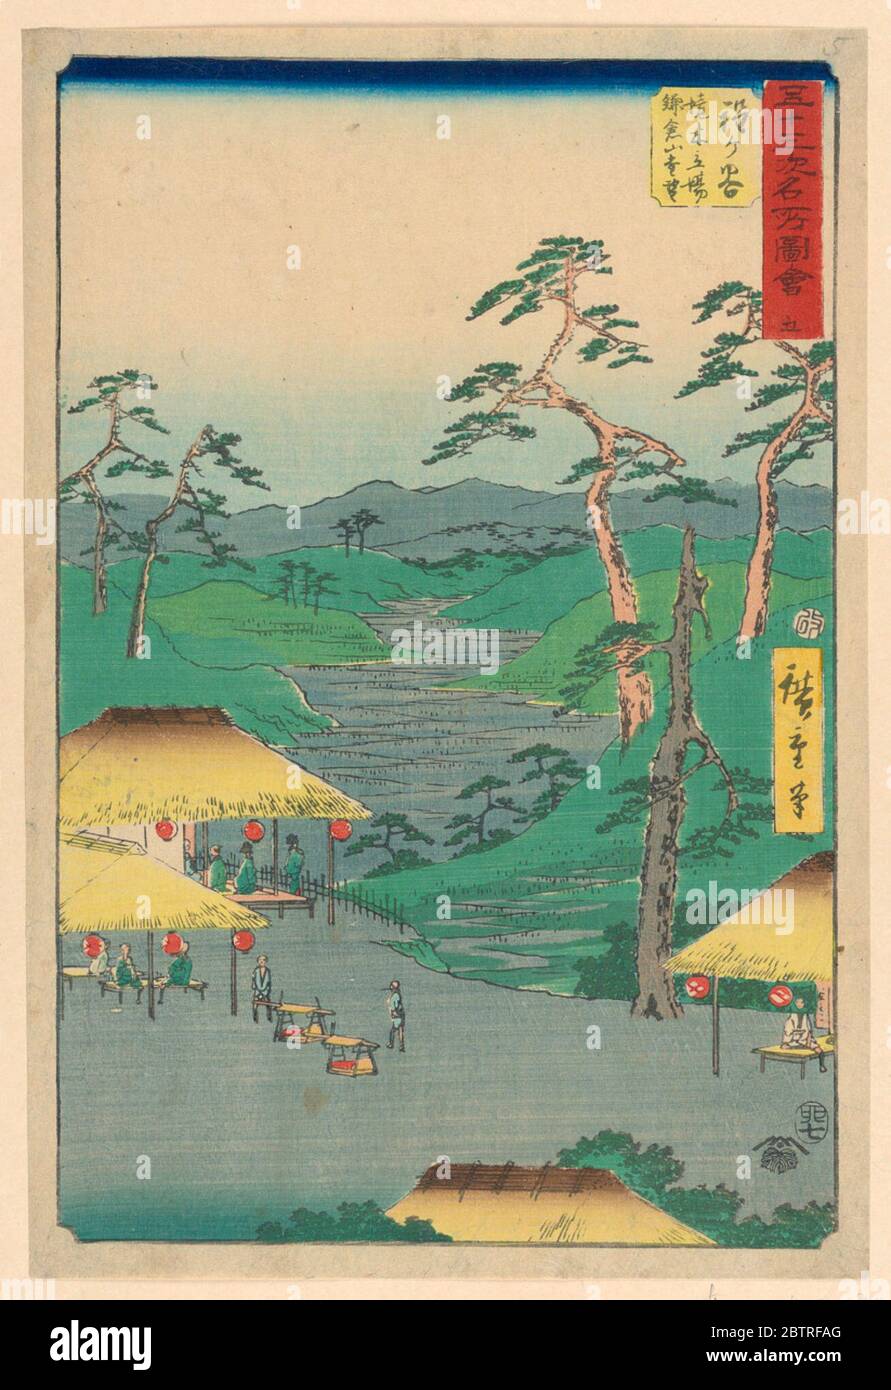 Valley View. Research in ProgressHiroshige's eye-catching folded valley leads the viewer's eye to meander towards the front of the print. Here we see four partial huts are lit with lanterns. Beneath them, people are resting on benches or standing outside enjoying the day. Stock Photo